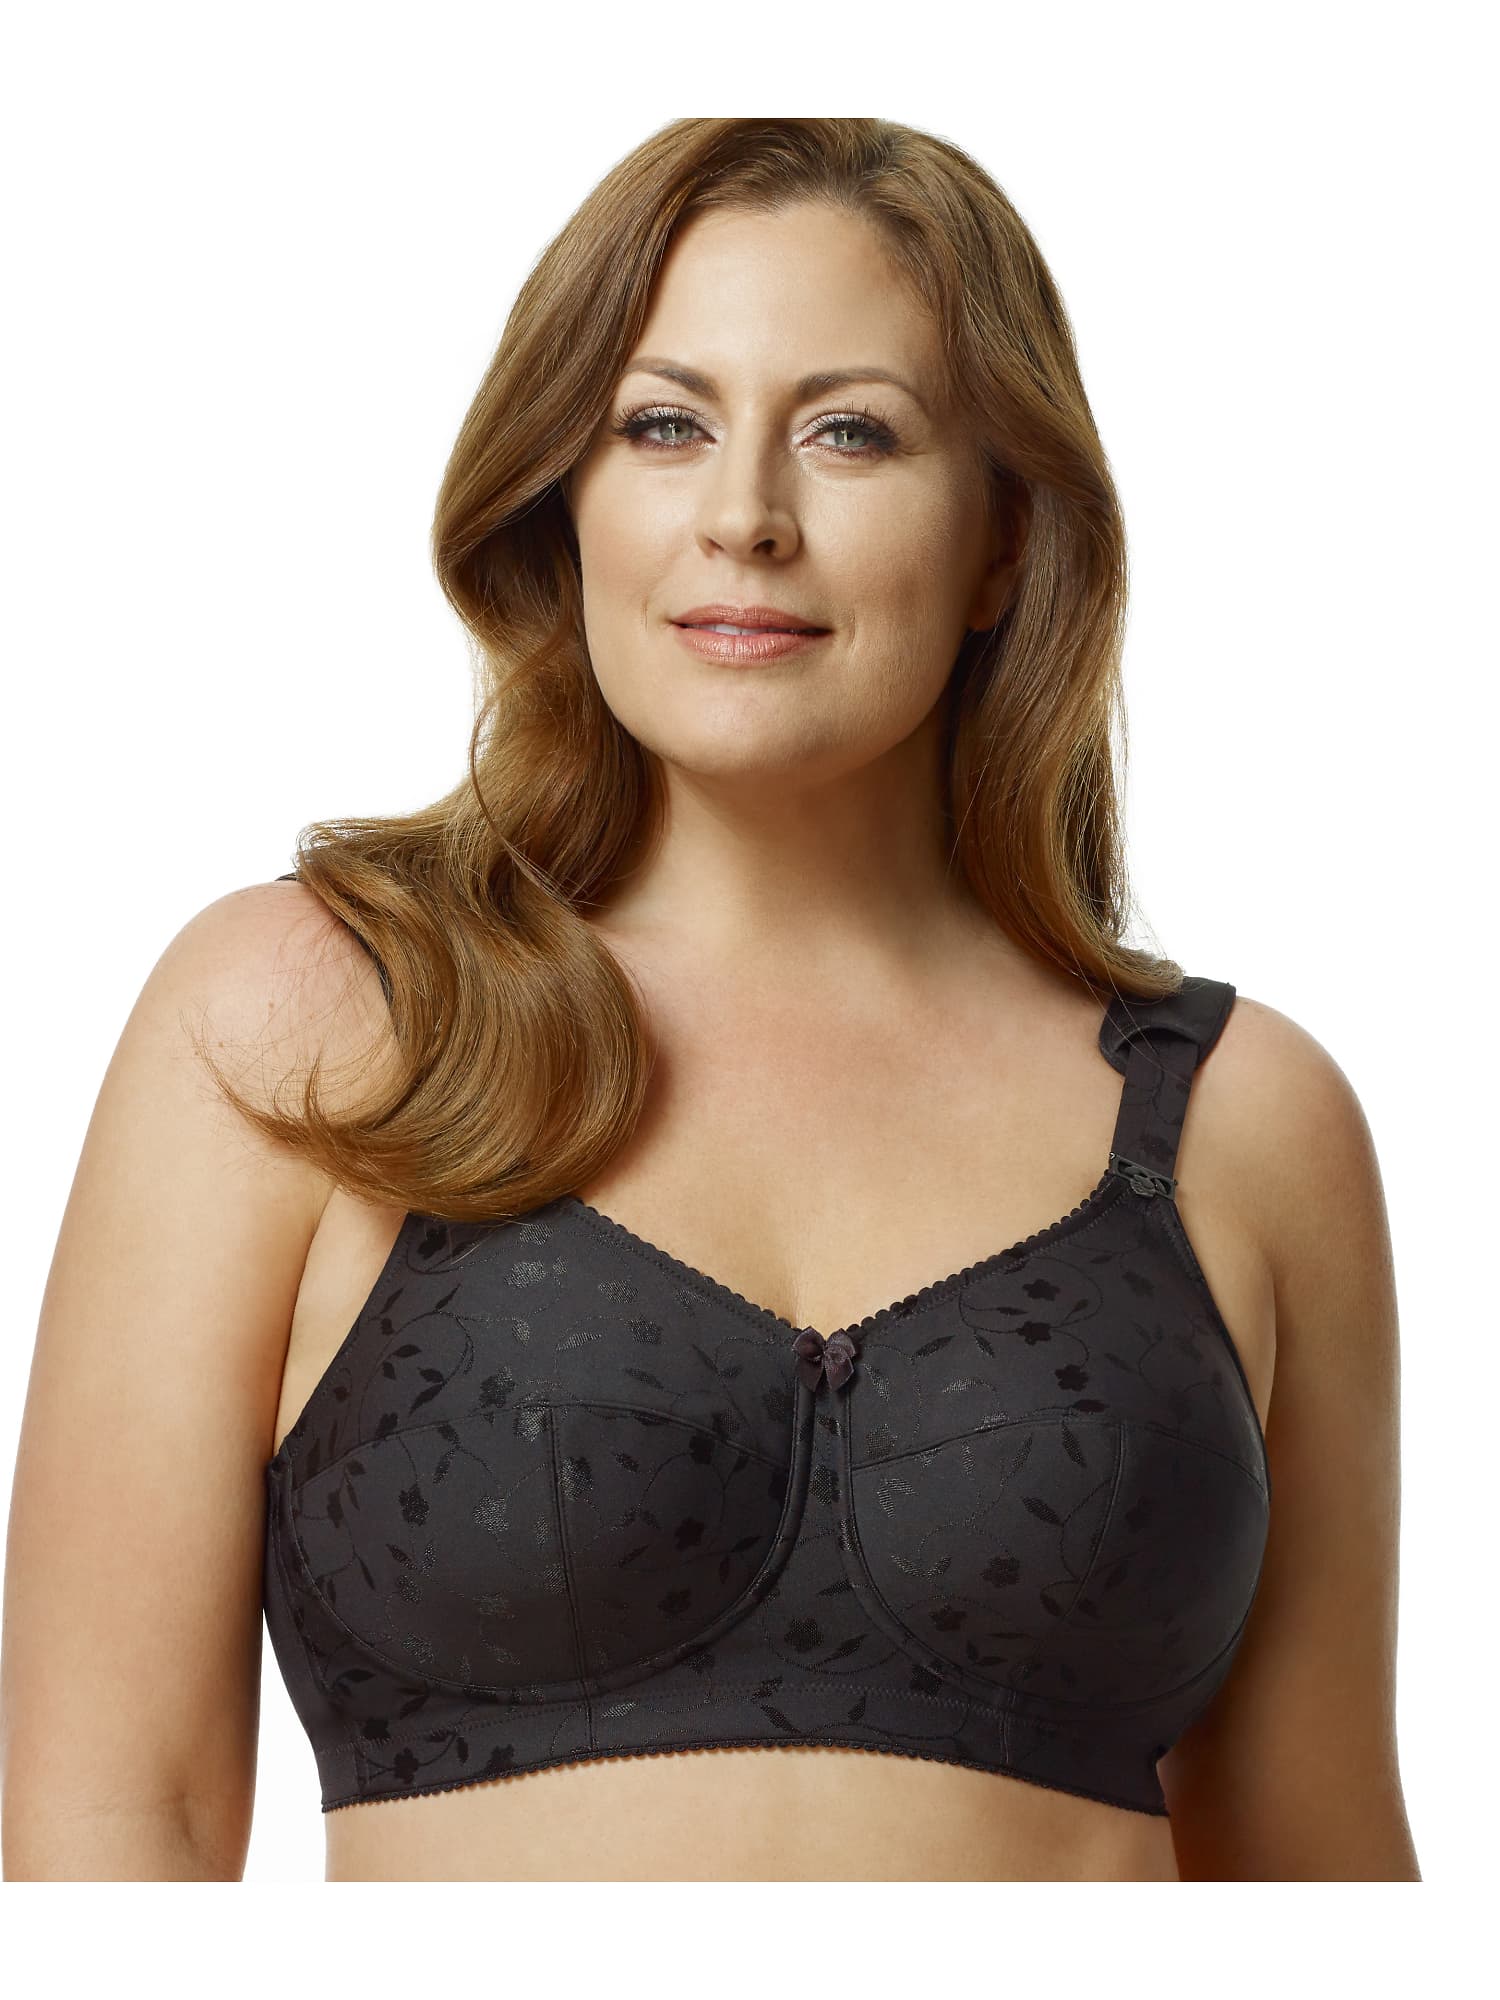 Size 40K Full Coverage Plus Size Bras: Cups B-K